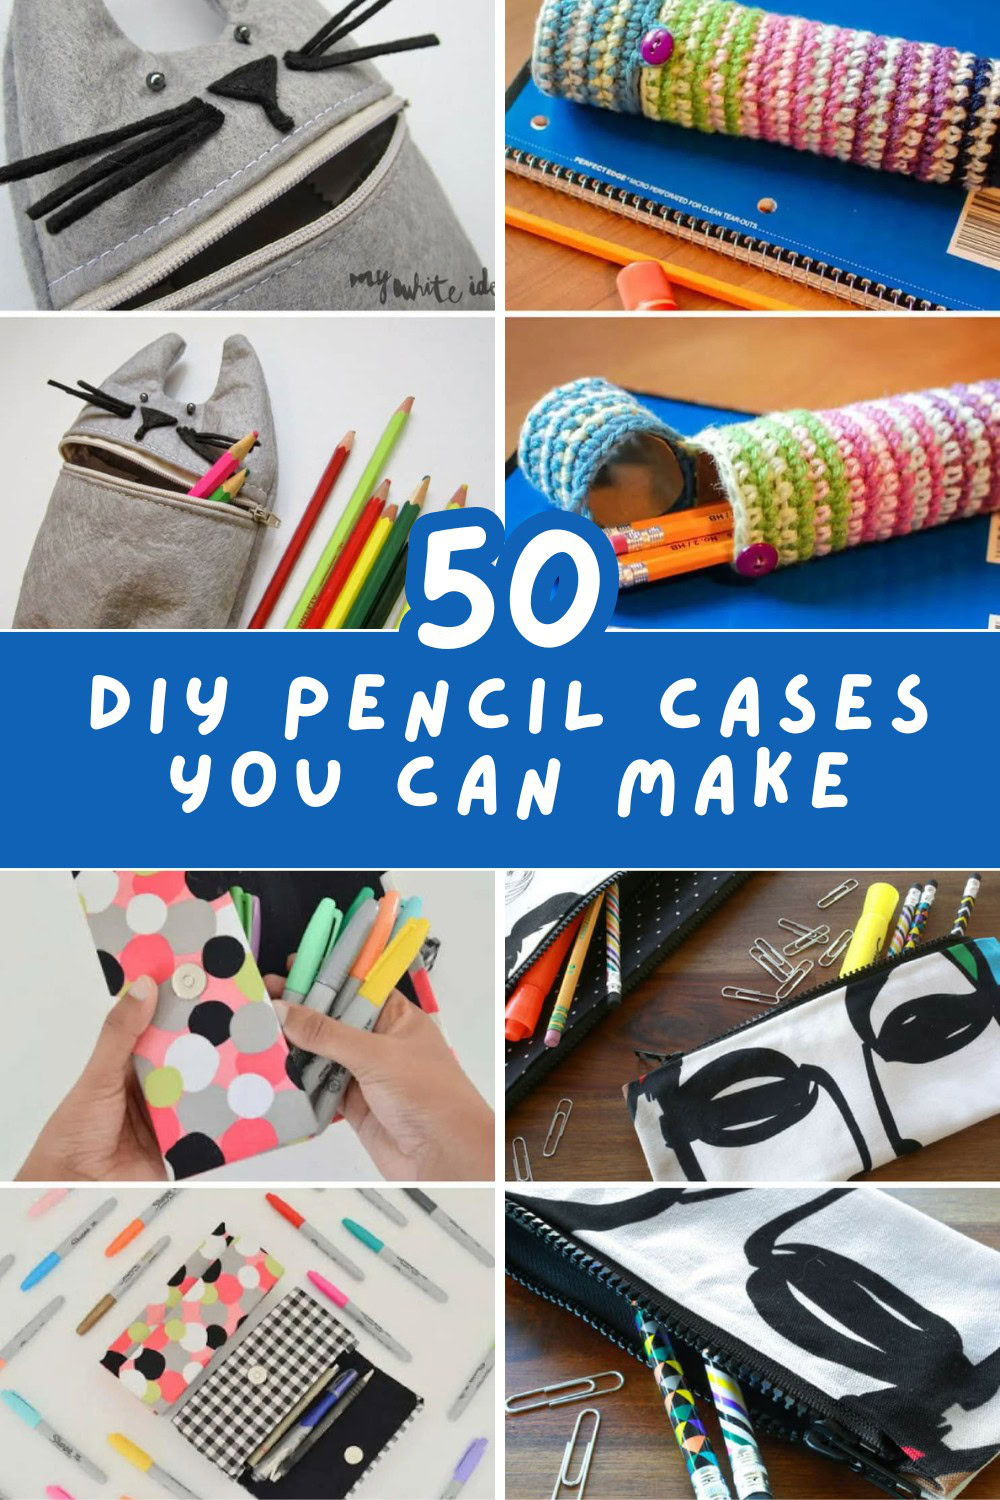 Why settle for a boring store-bought pencil pouch? Get inspired with these 40 totally cool DIY pencil cases and head back to school in style! #BackToSchoolDIY #CreativePencilCases

